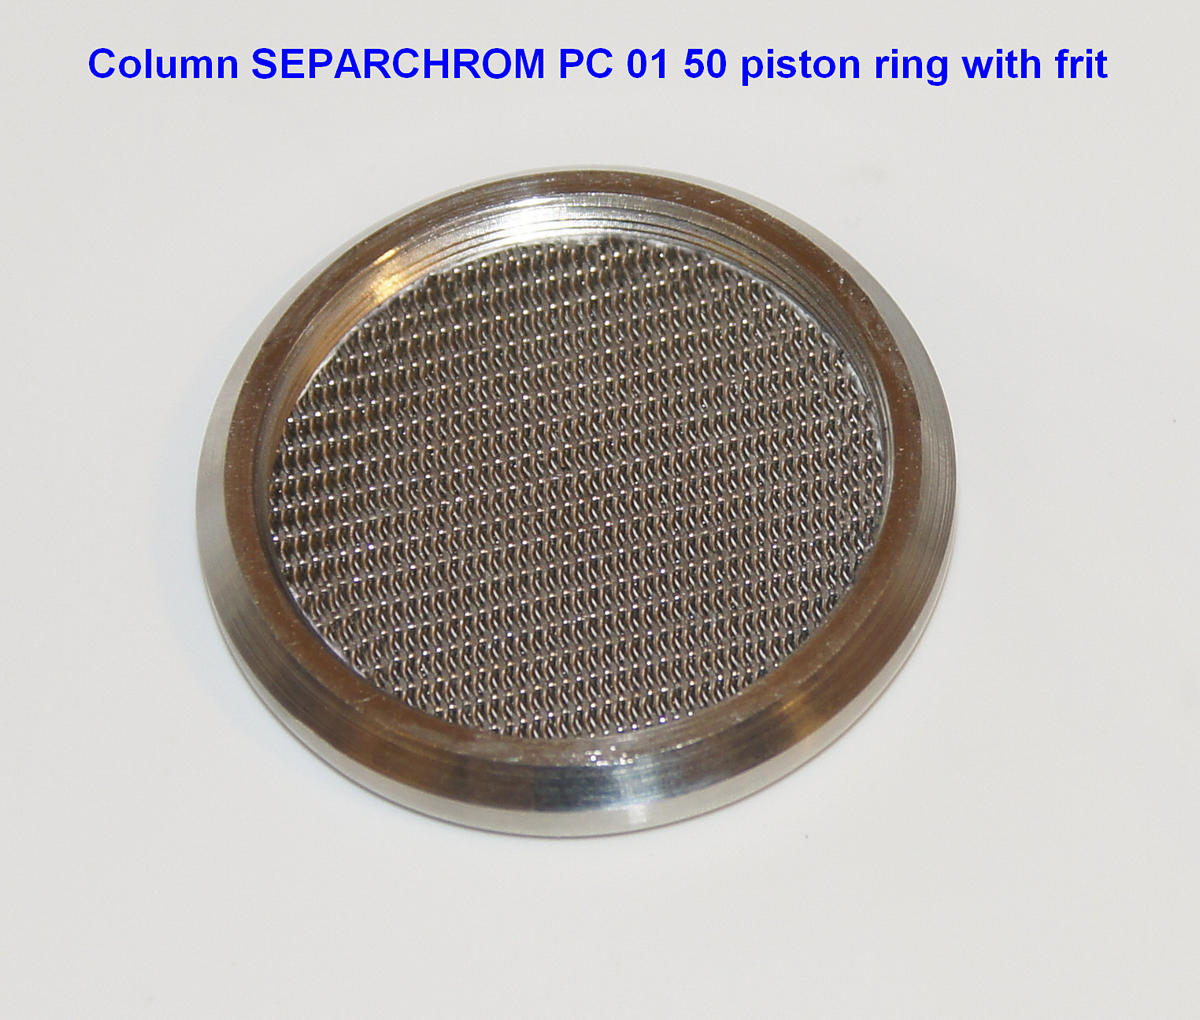 SEPARCHROM PC01 50/250 PISTON RING WITH FRIT